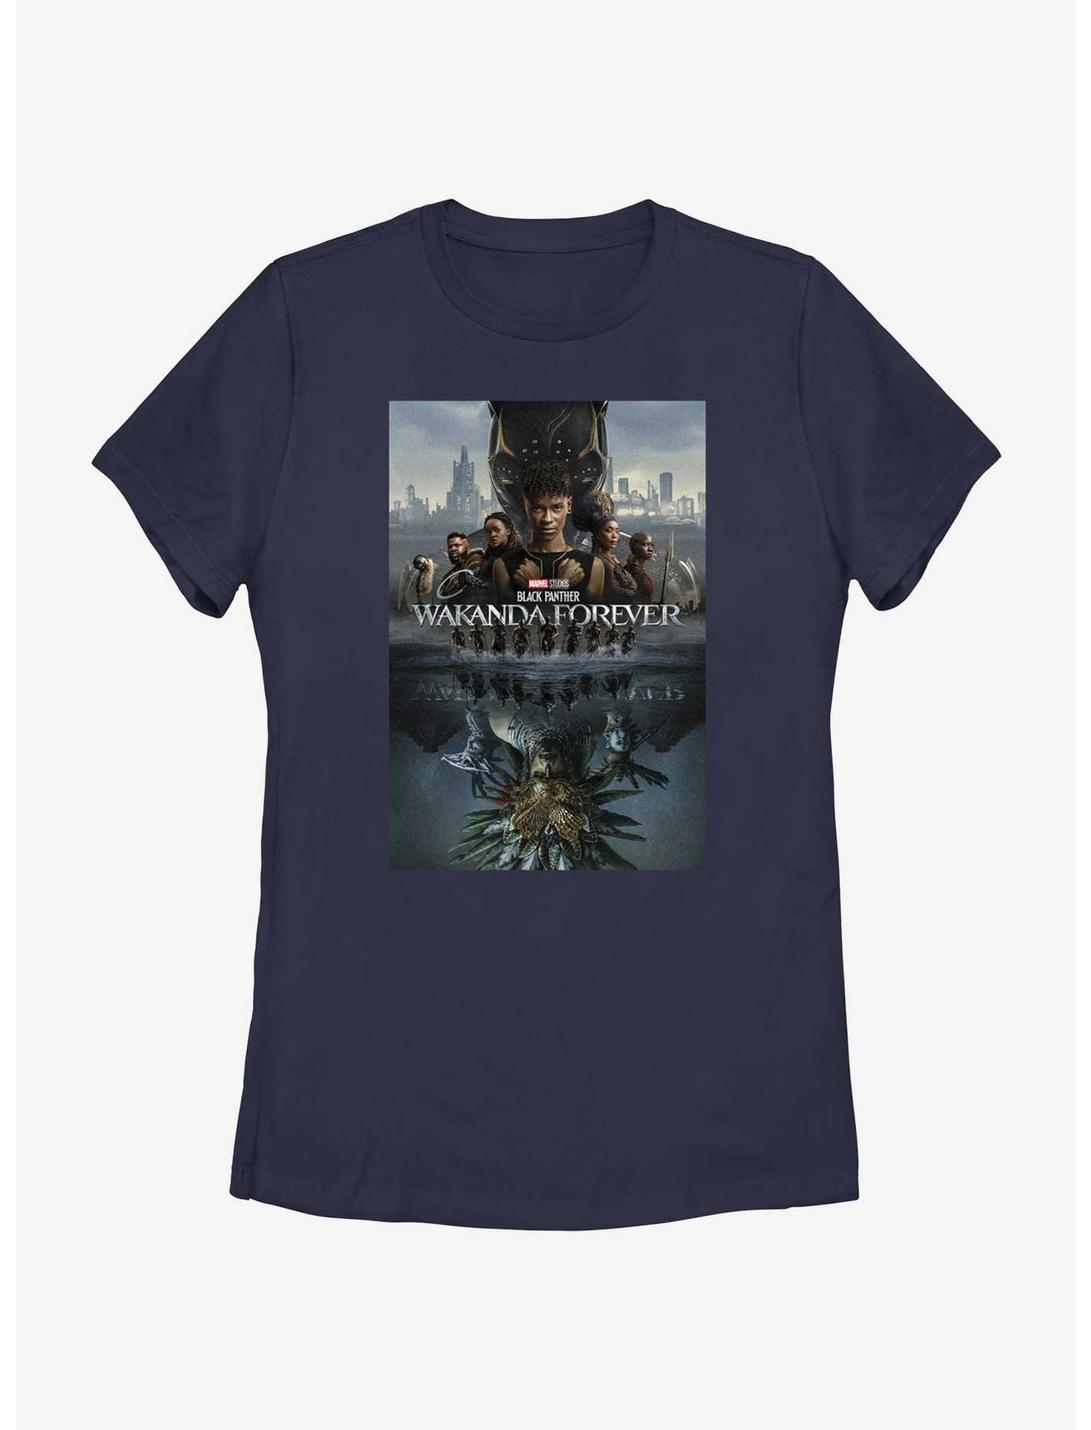 Marvel Black Panther: Wakanda Forever Poster Womens T-Shirt Her Universe Web Exclusive, NAVY, hi-res